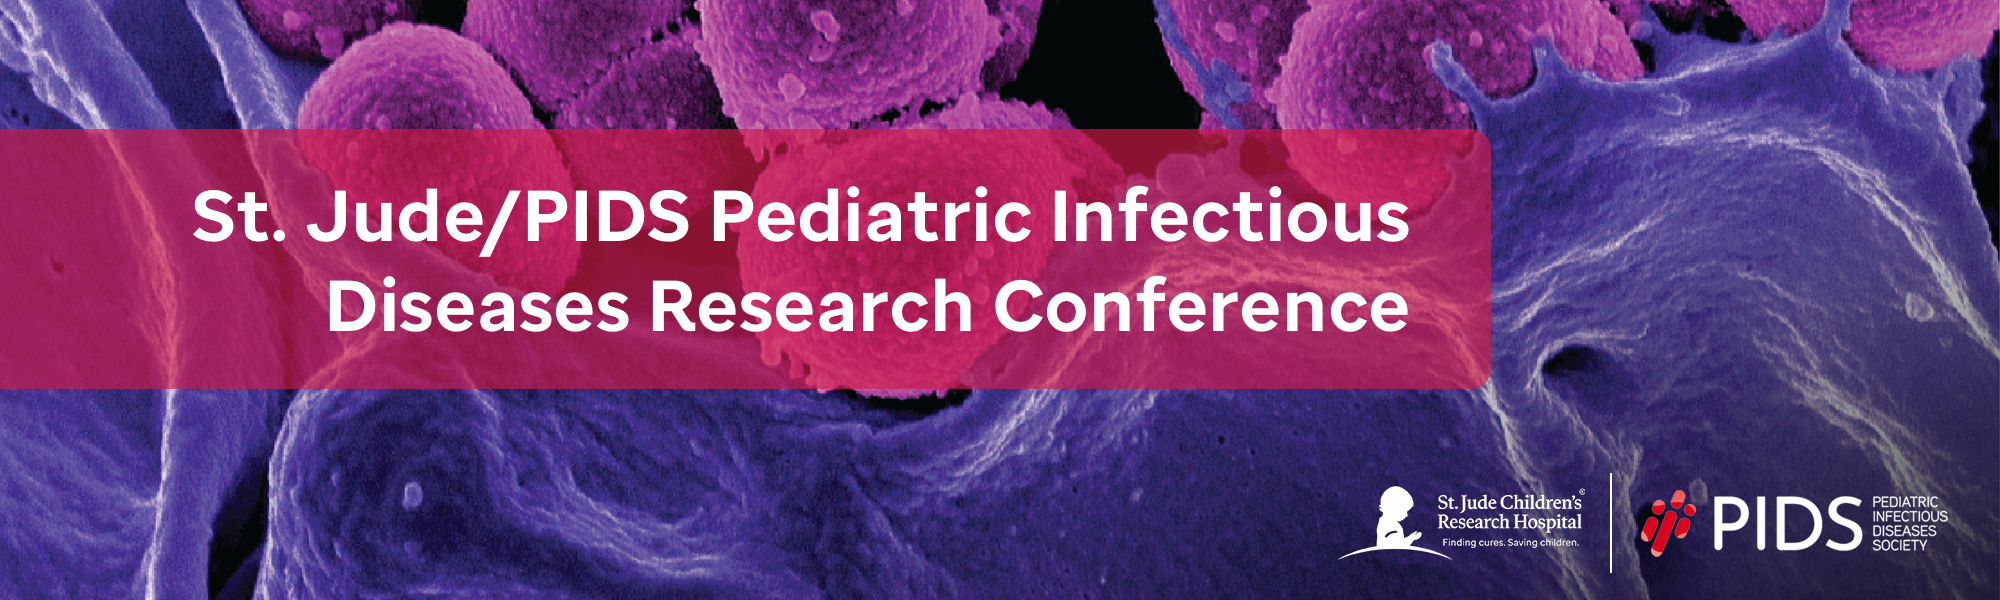 St. Jude/PIDS Pediatric Infectious Diseases Research Conference St